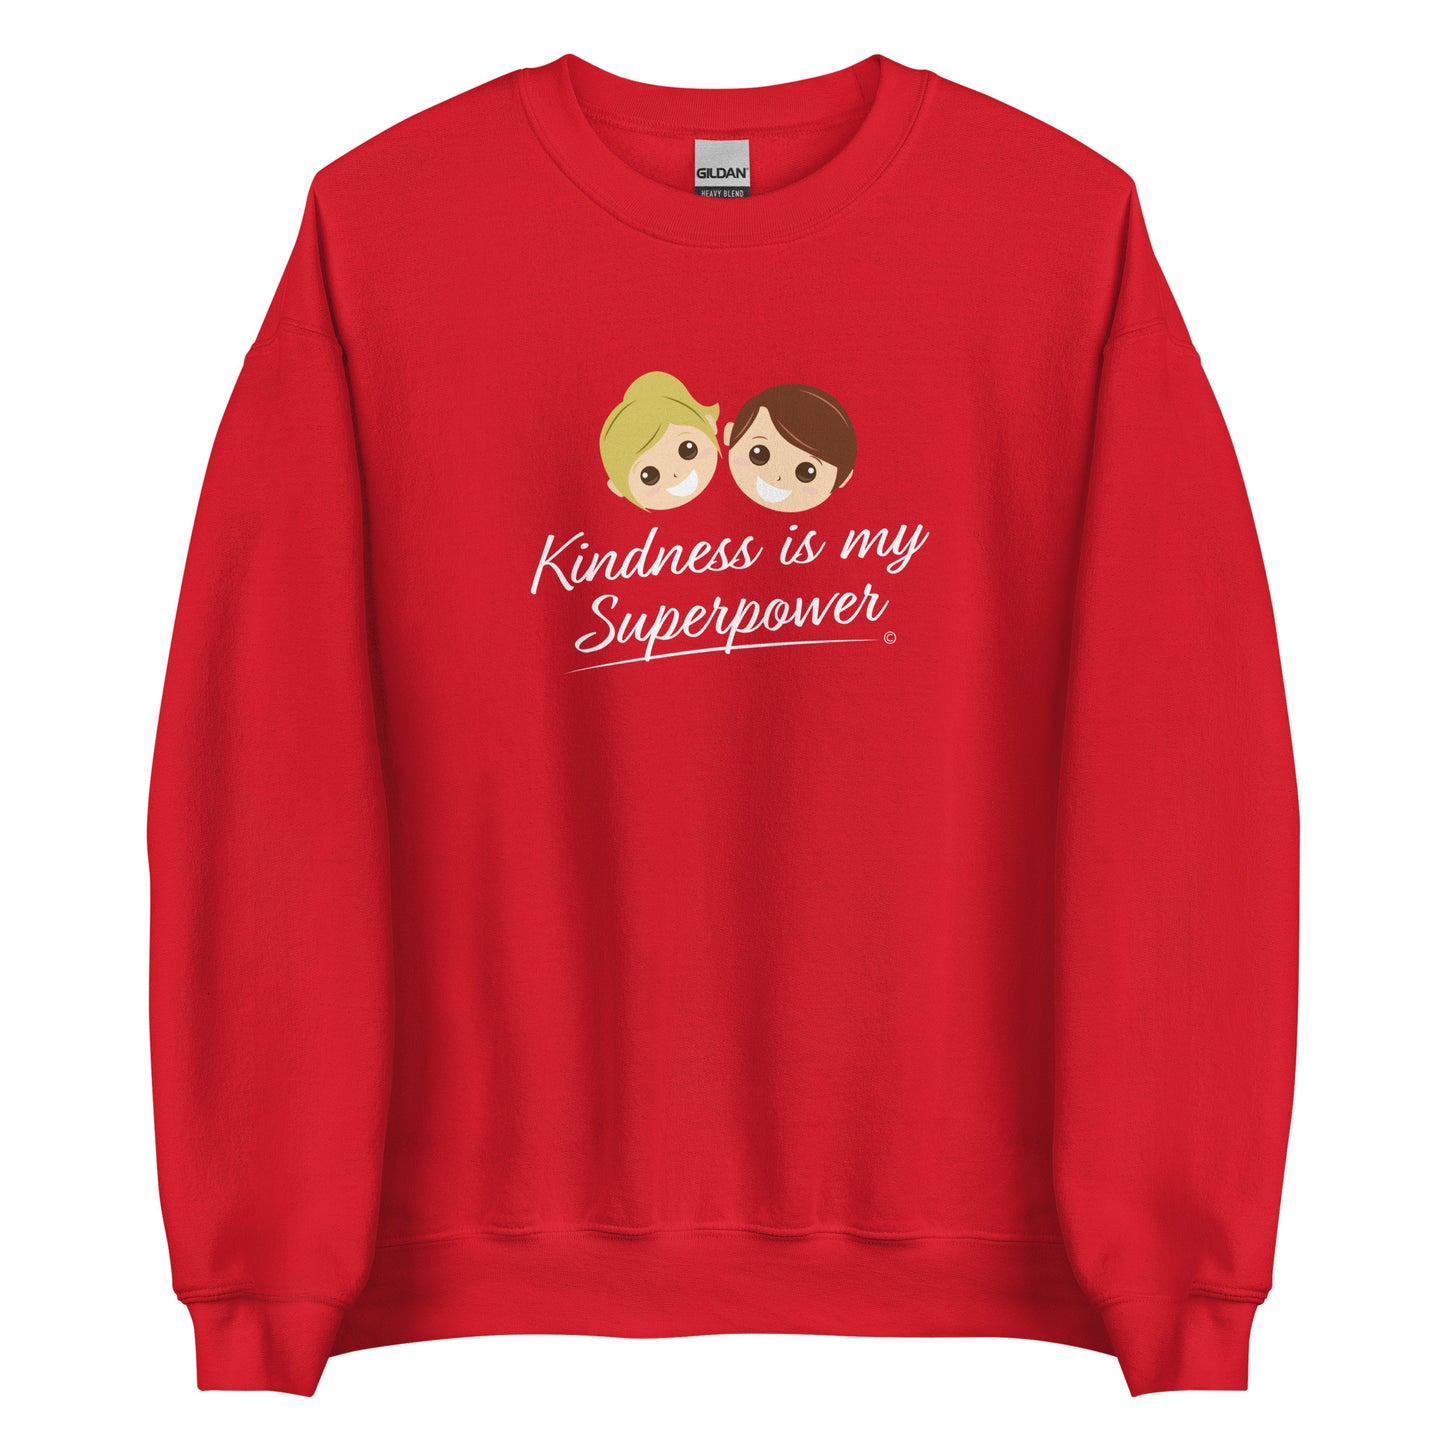 A cozy unisex sweatshirt in red featuring the uplifting quote 'Kindness is my Superpower' in bold lettering.